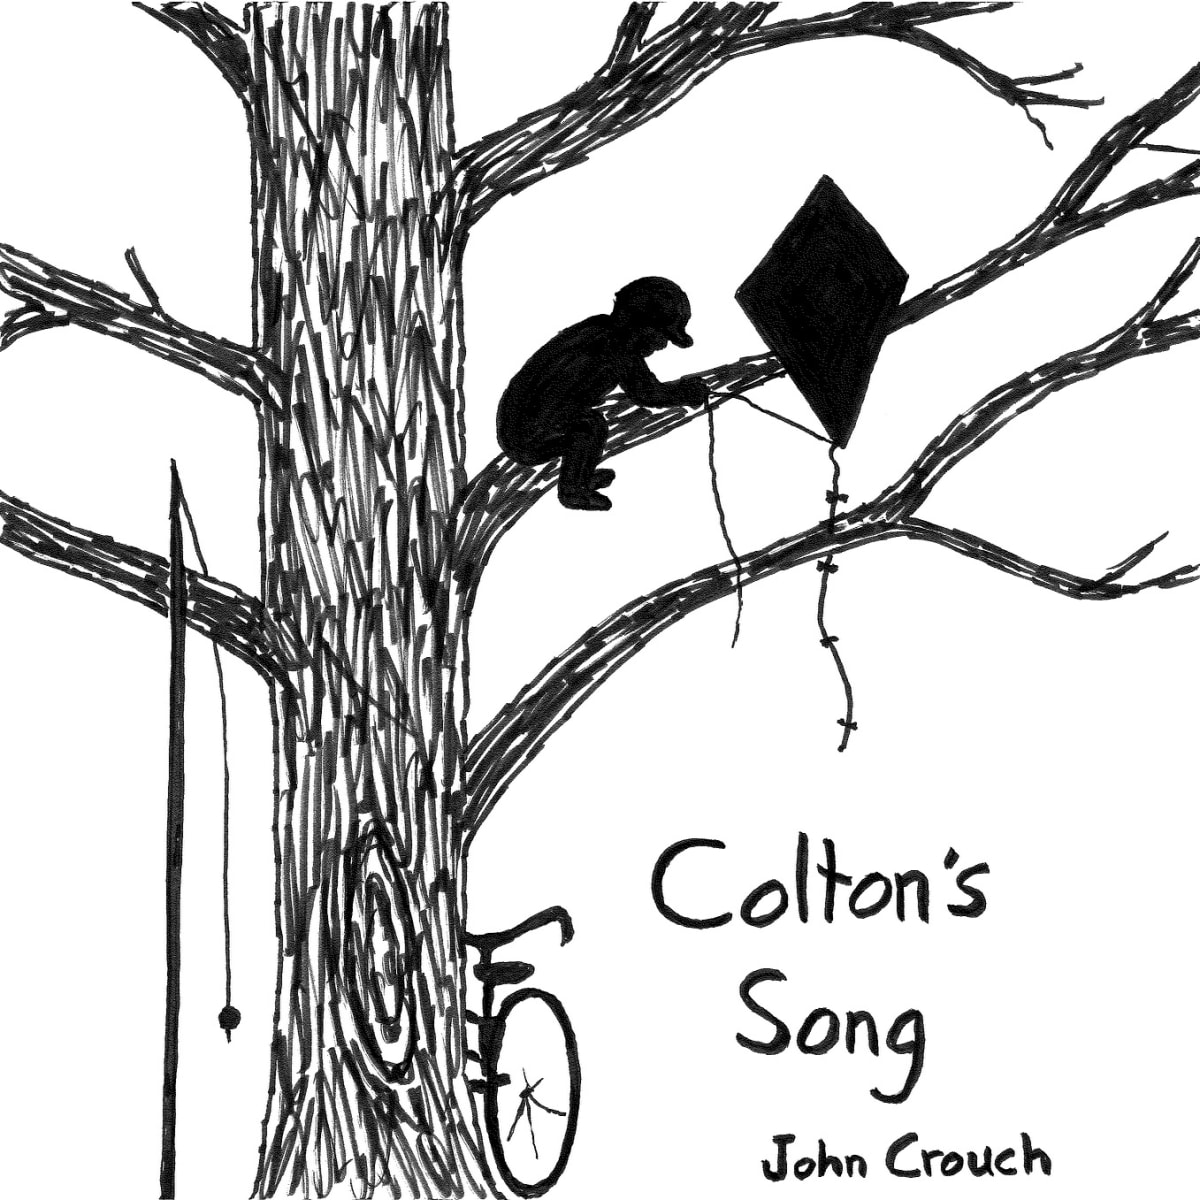 Colton’s Song (music cover art) by Shelley Crouch  Image: Cover art for original song by John Crouch